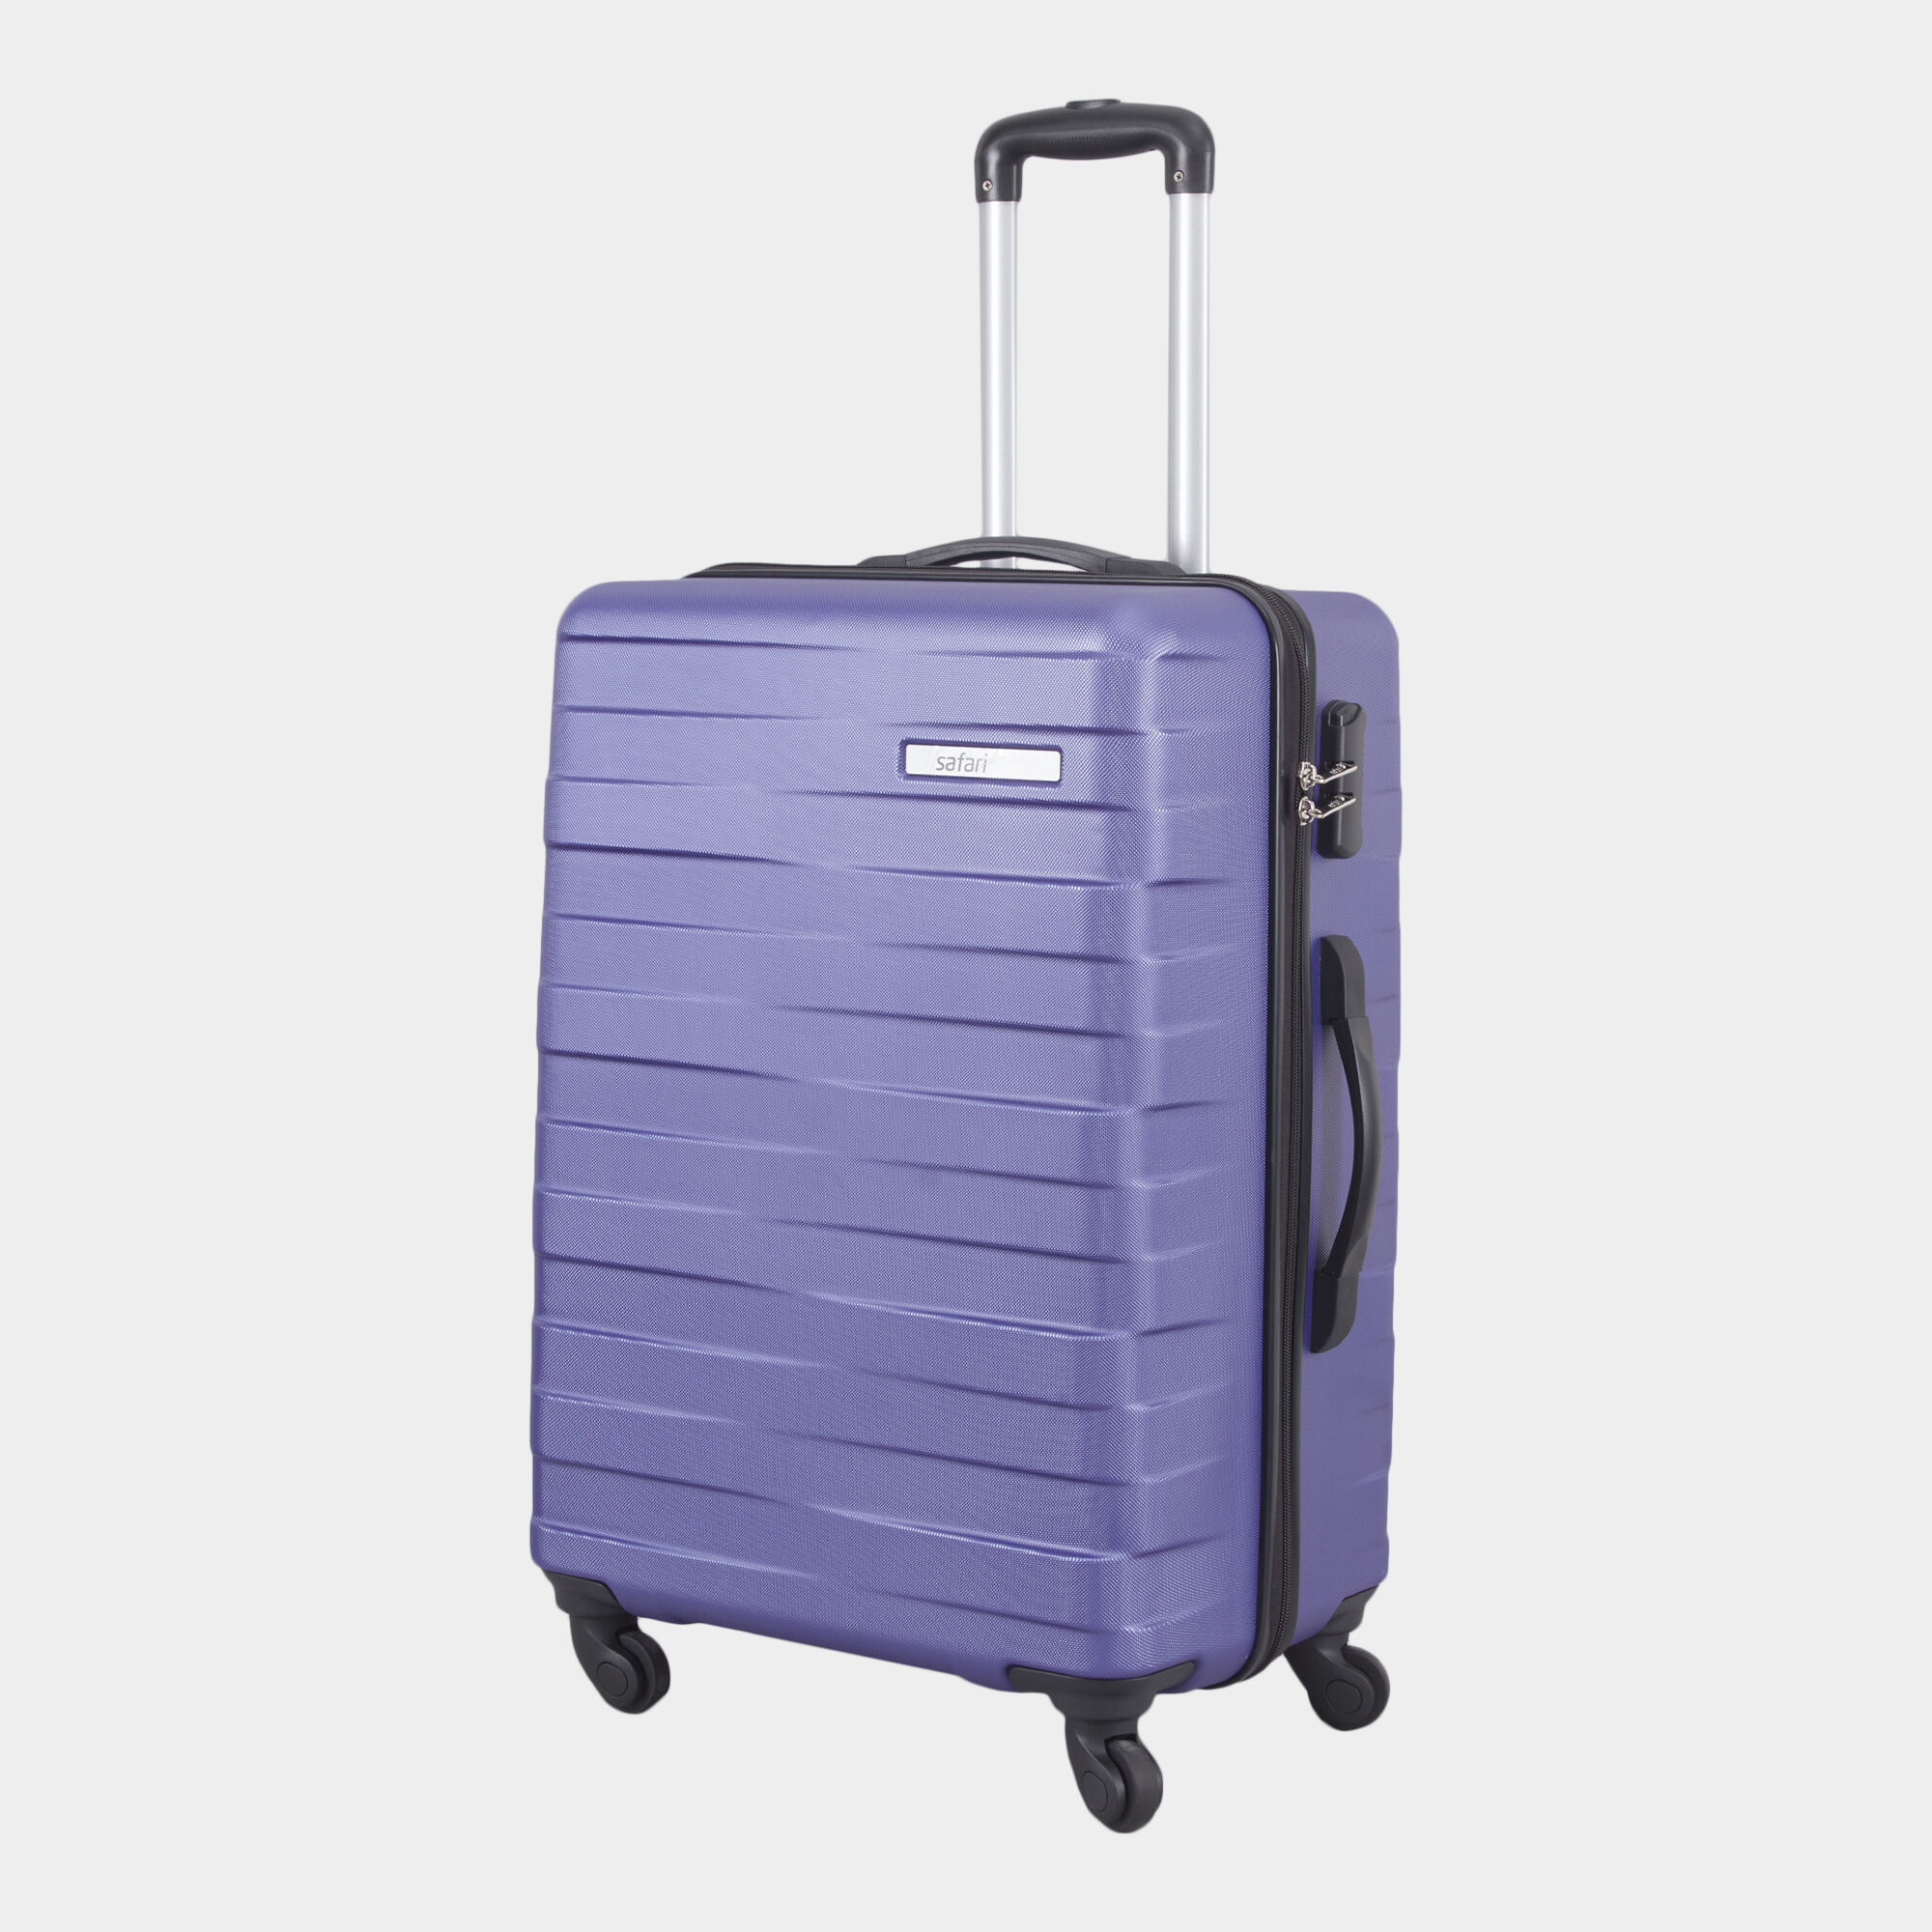 Princeware 6713 Volumex Prince Fine Travelware 4W Soft Luggage Trolley Bag,  58 x 39 x 19 cm in Chandigarh at best price by Acg Industries - Justdial